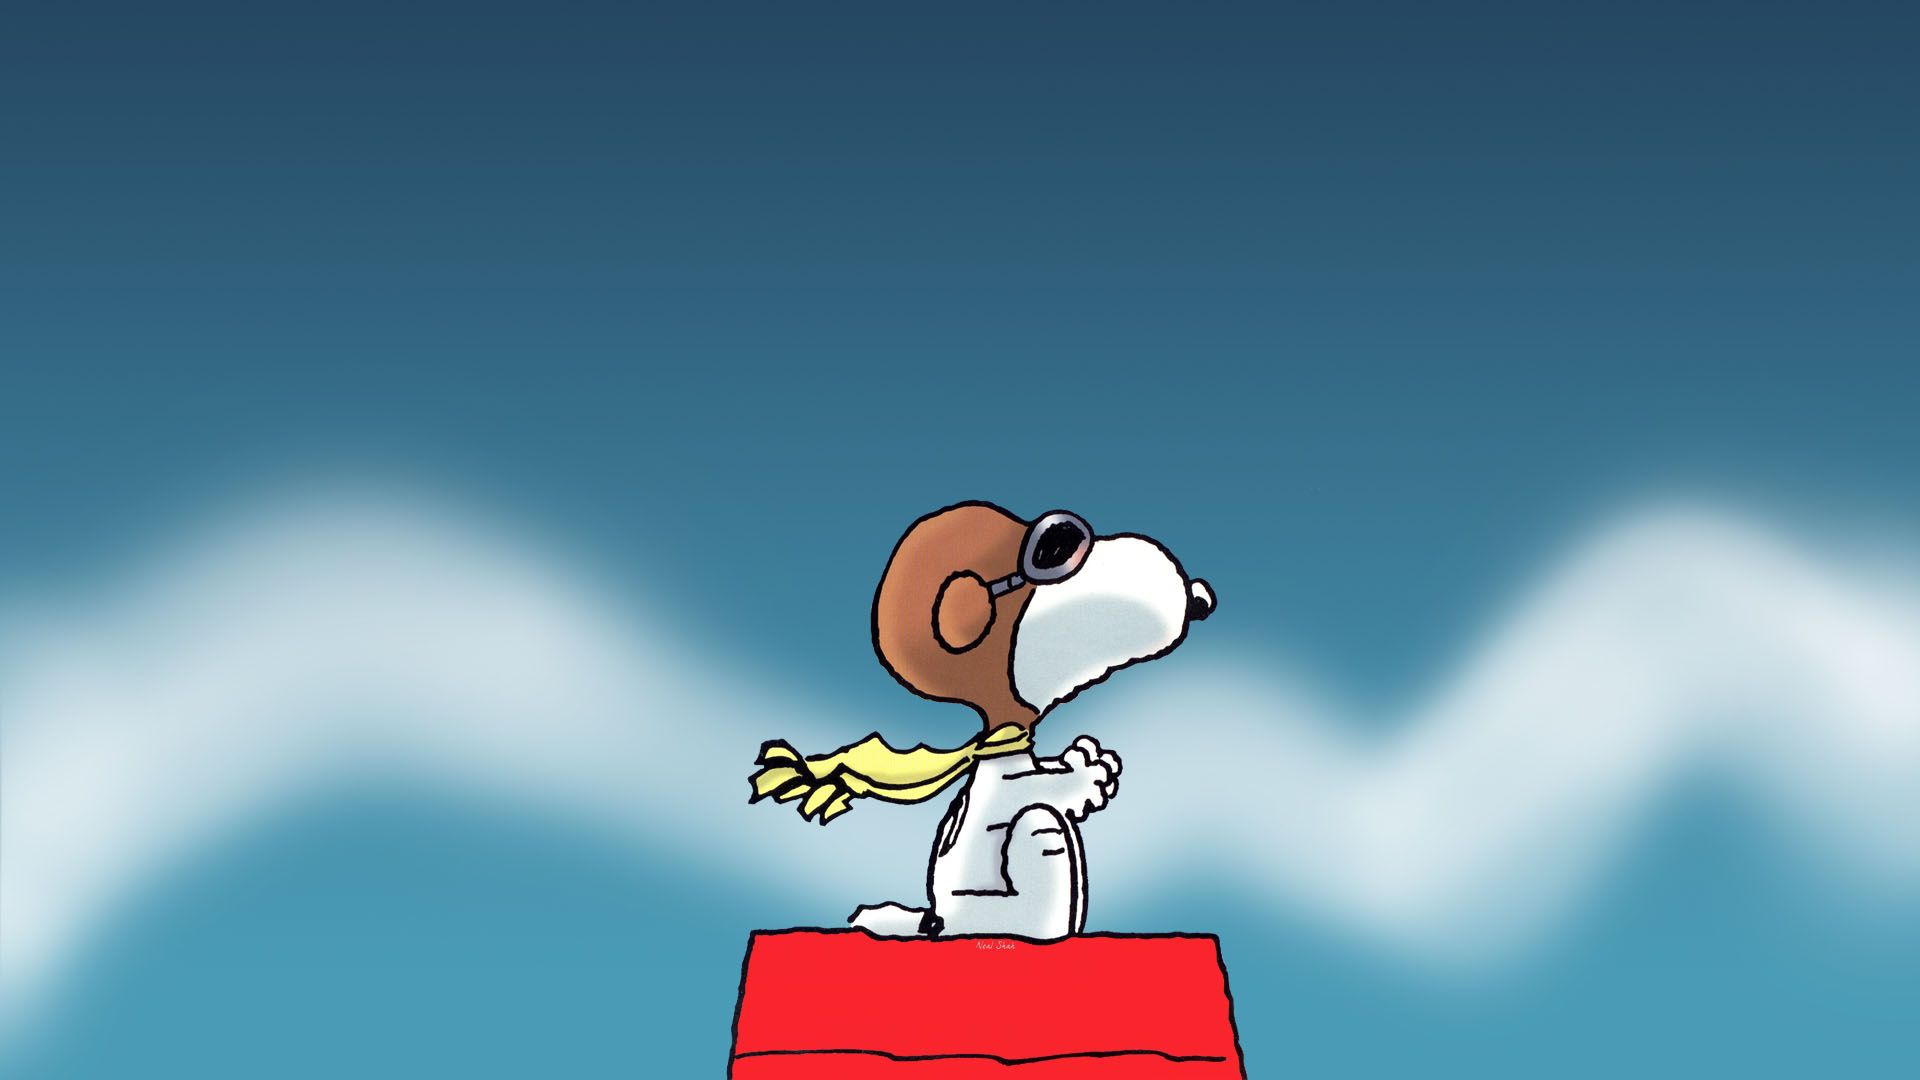 Top 15] Cute Snoopy Wallpaper And Theme For Windows 8 | All For ...